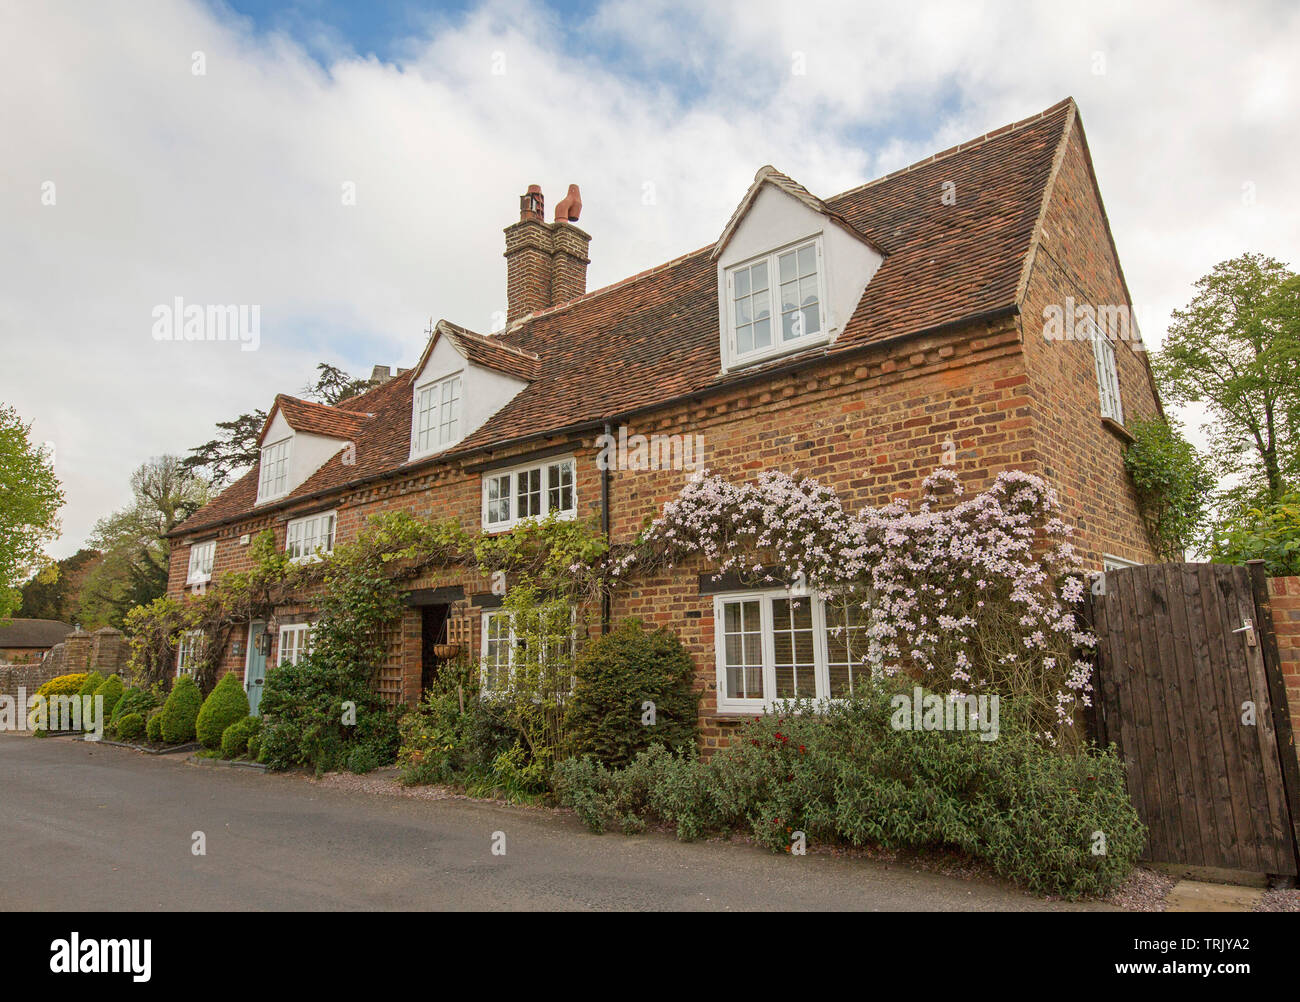 Two storey red brick house with dormer windows with clematis blooming on walls and garden of shrubs in village of Denham, Buckinghamshire England Stock Photo